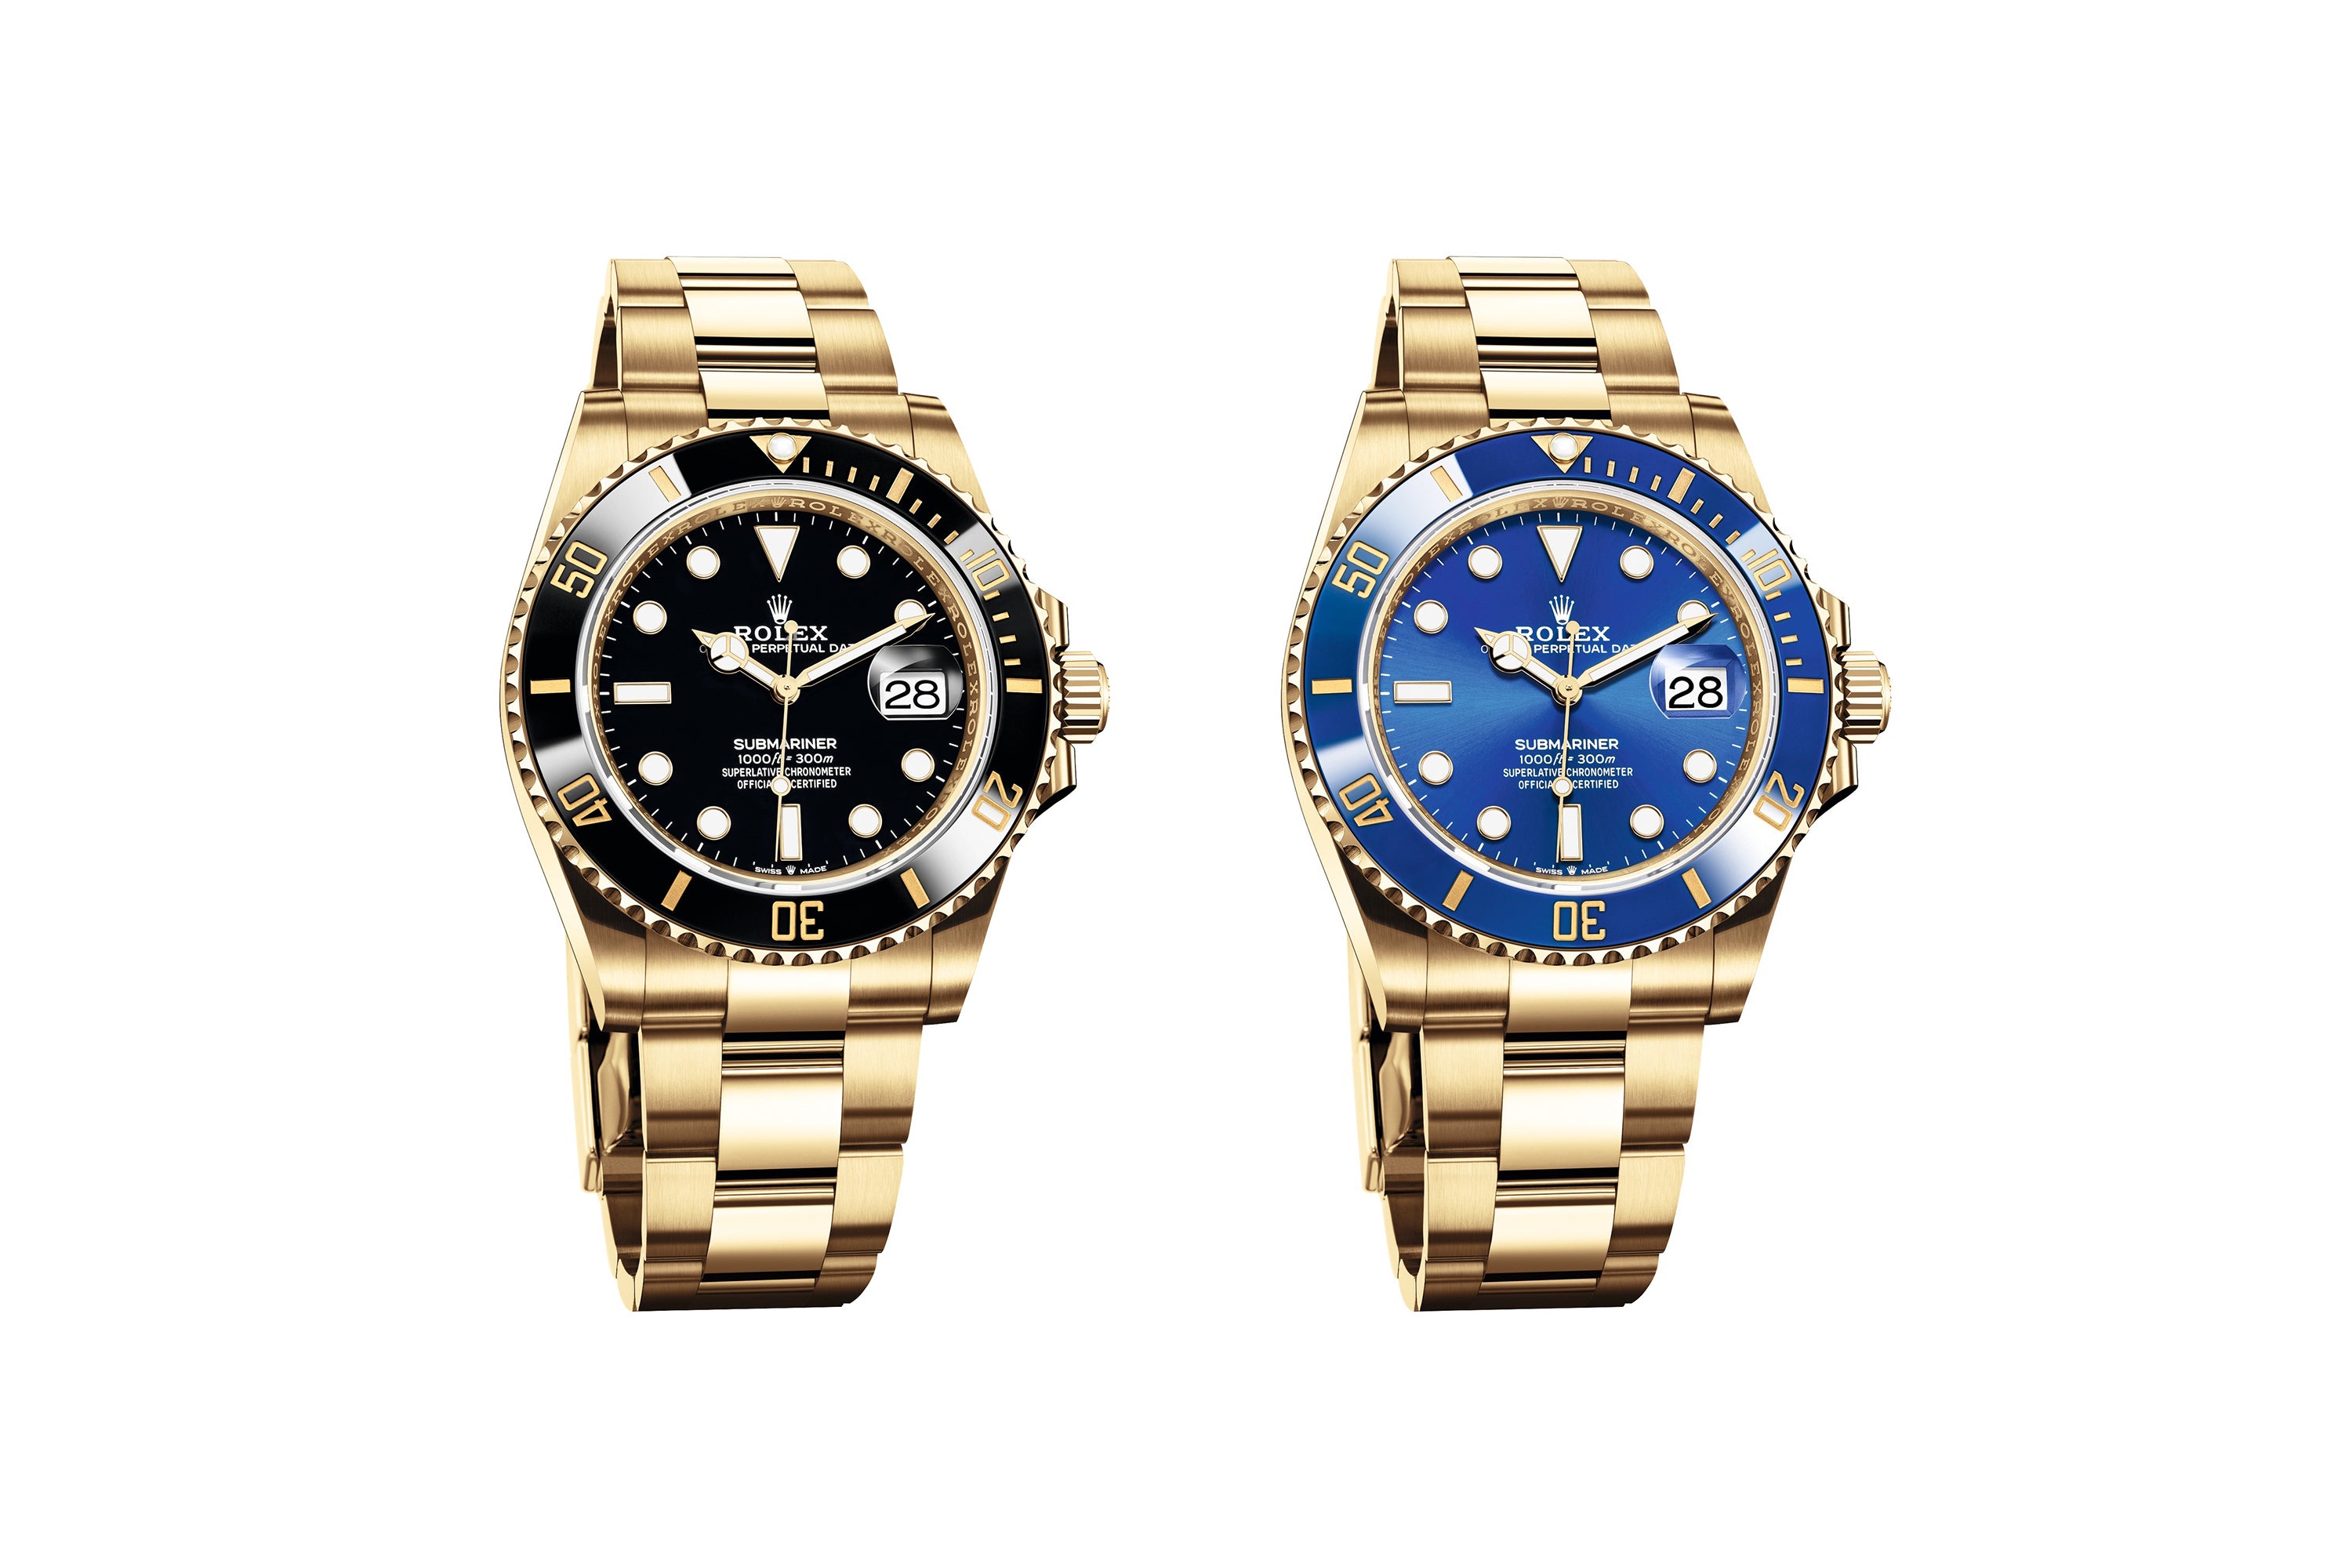 Yellow Gold Rolex Submariner with black dial and bezel and blue dial and bezel